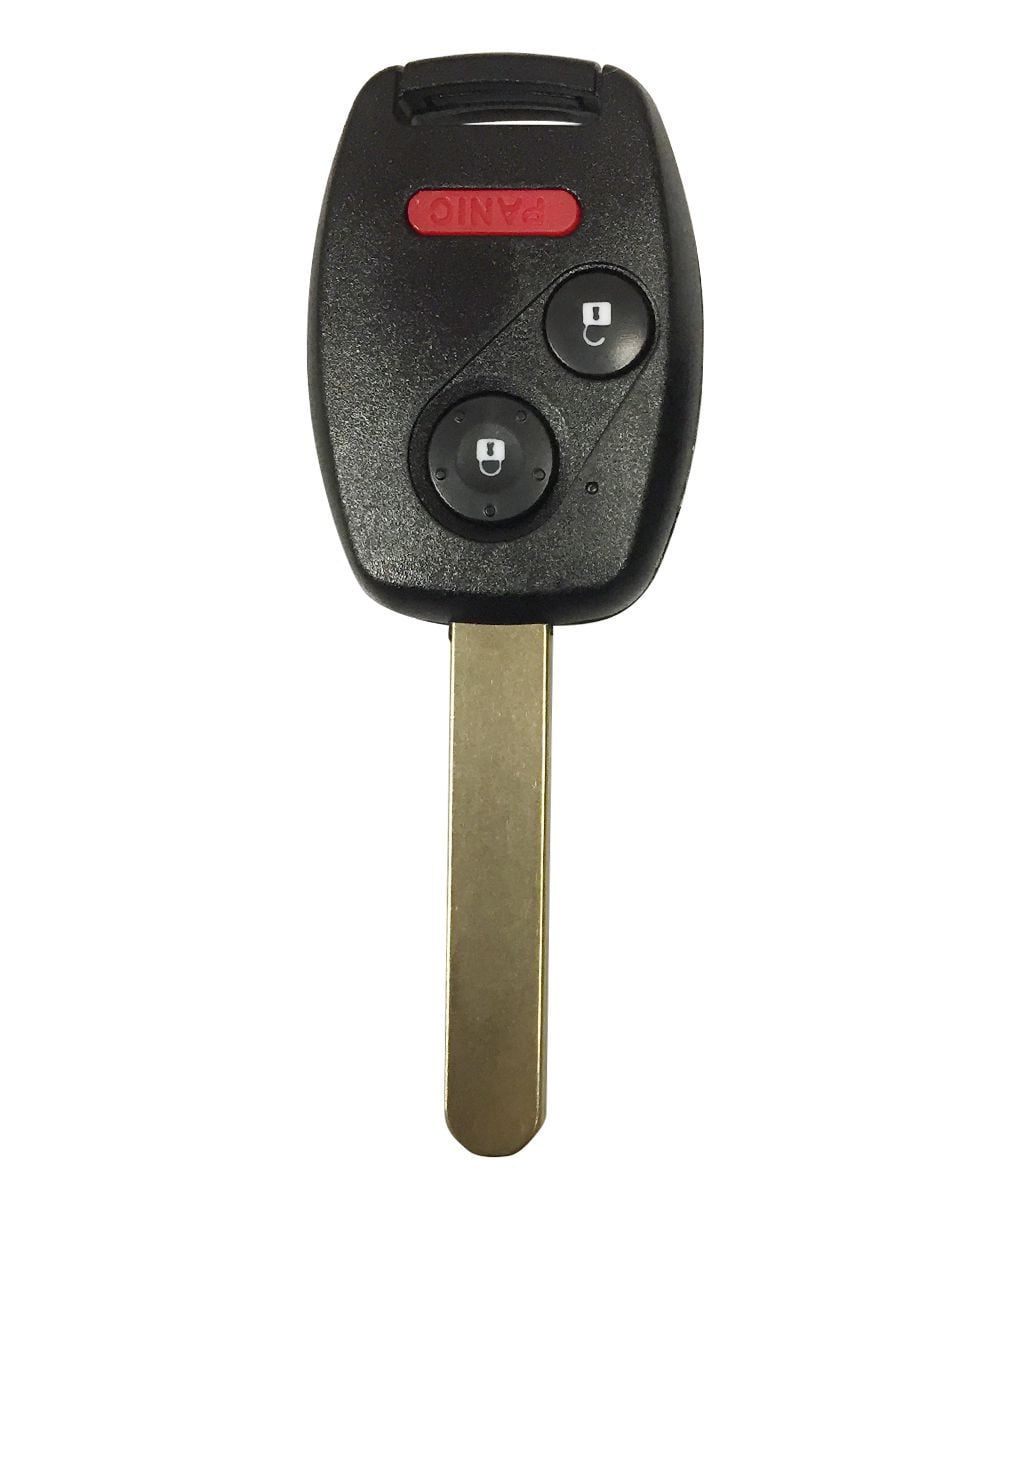 For 2007 2008 2009 2010 2011 2012 2013 Honda Fit Remote Key Fob Uncut Shell Case 